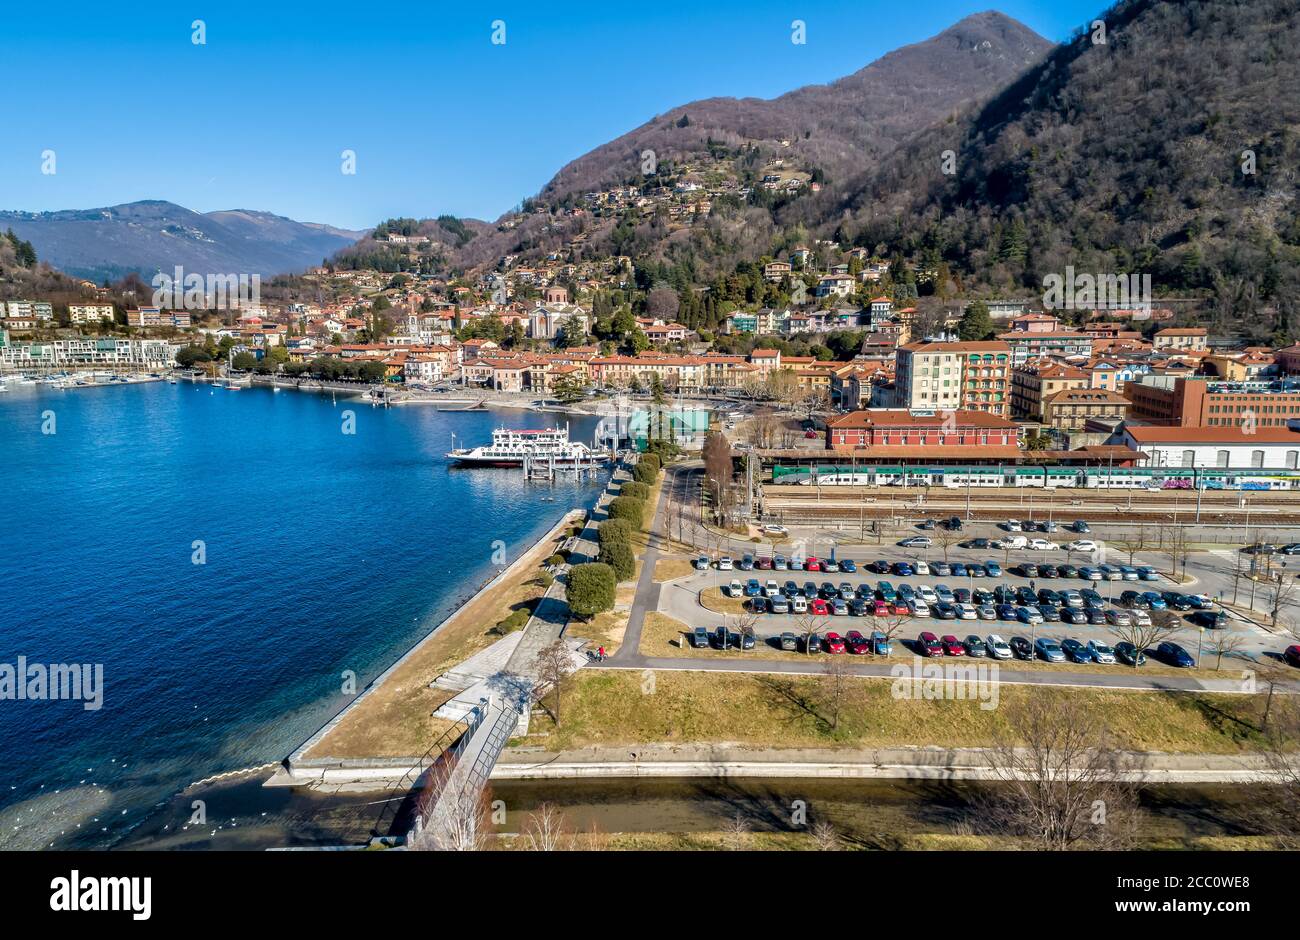 Aerial view of Laveno Mombello on the coast of lake Maggiore, province of Varese, Italy Stock Photo